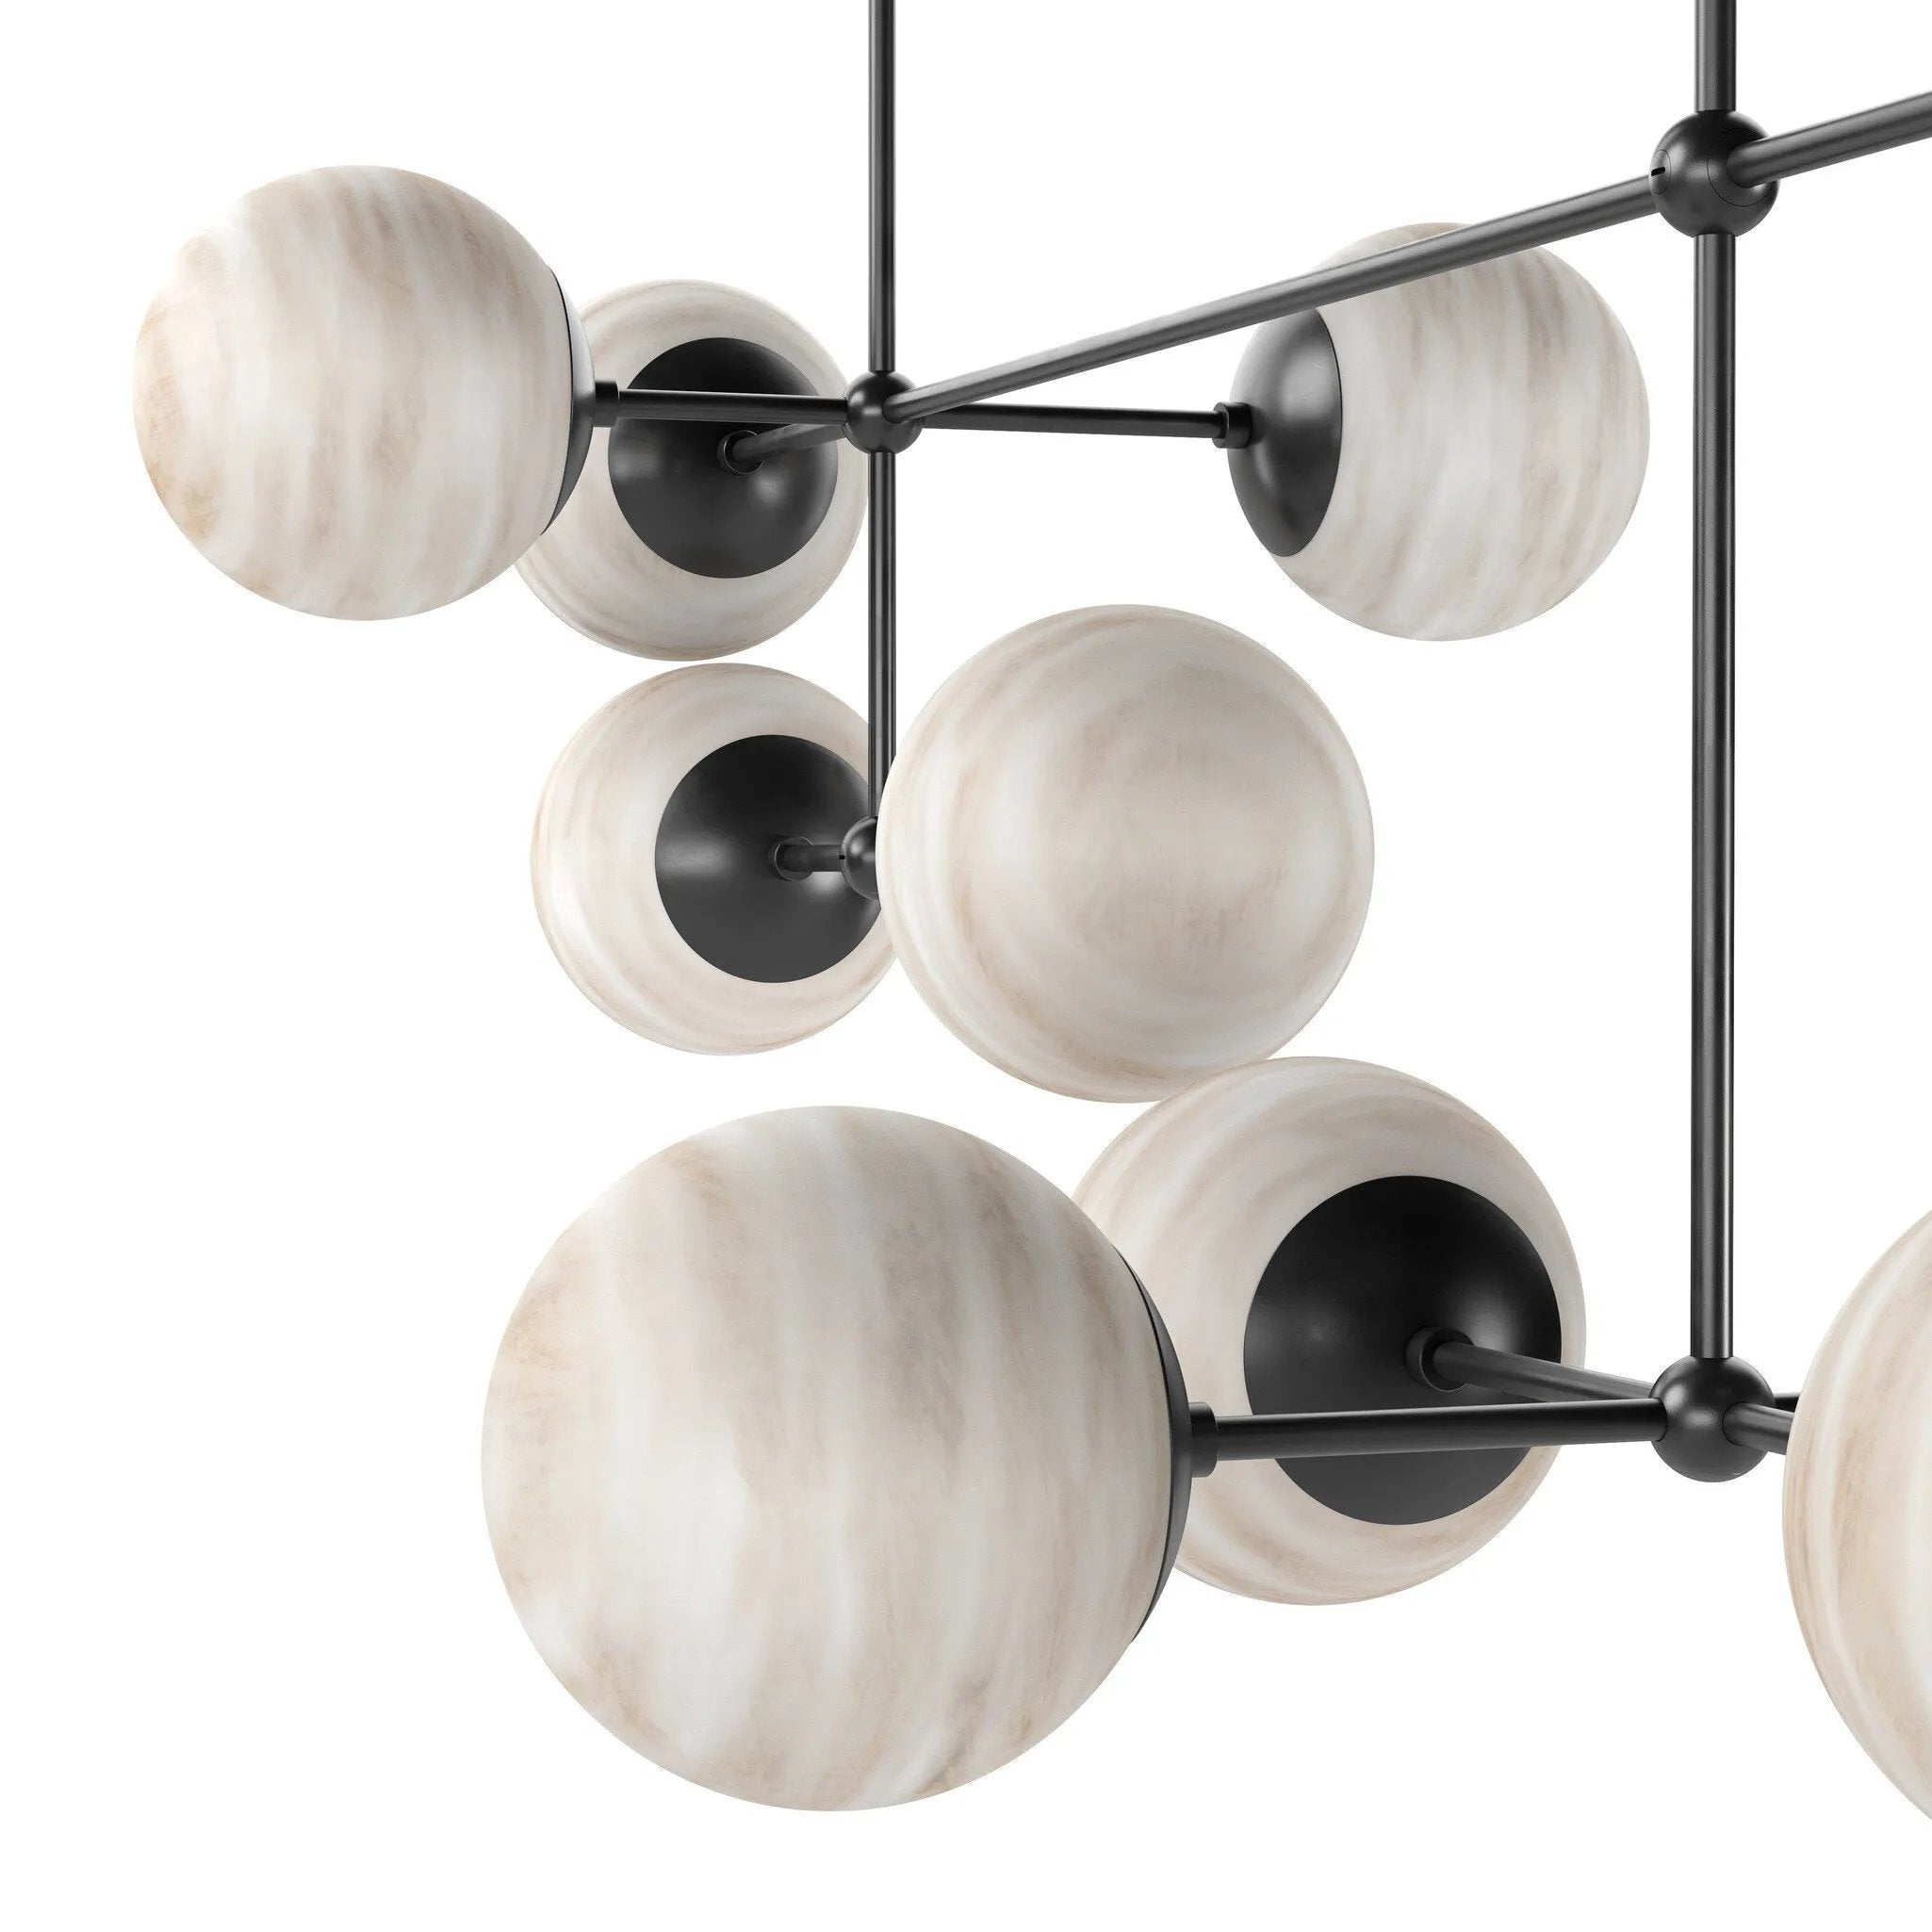 Marbled glass spheres seem to extend and reach across smooth brass rods. Each globe is individually blown, shaped and sculpted by hand through a one-hour process. The finish on the brass frame is achieved through a specialized process that turns the brass into an almost black hue before the rod is polished smooth. Amethyst Home provides interior design, new home construction design consulting, vintage area rugs, and lighting in the Des Moines metro area.